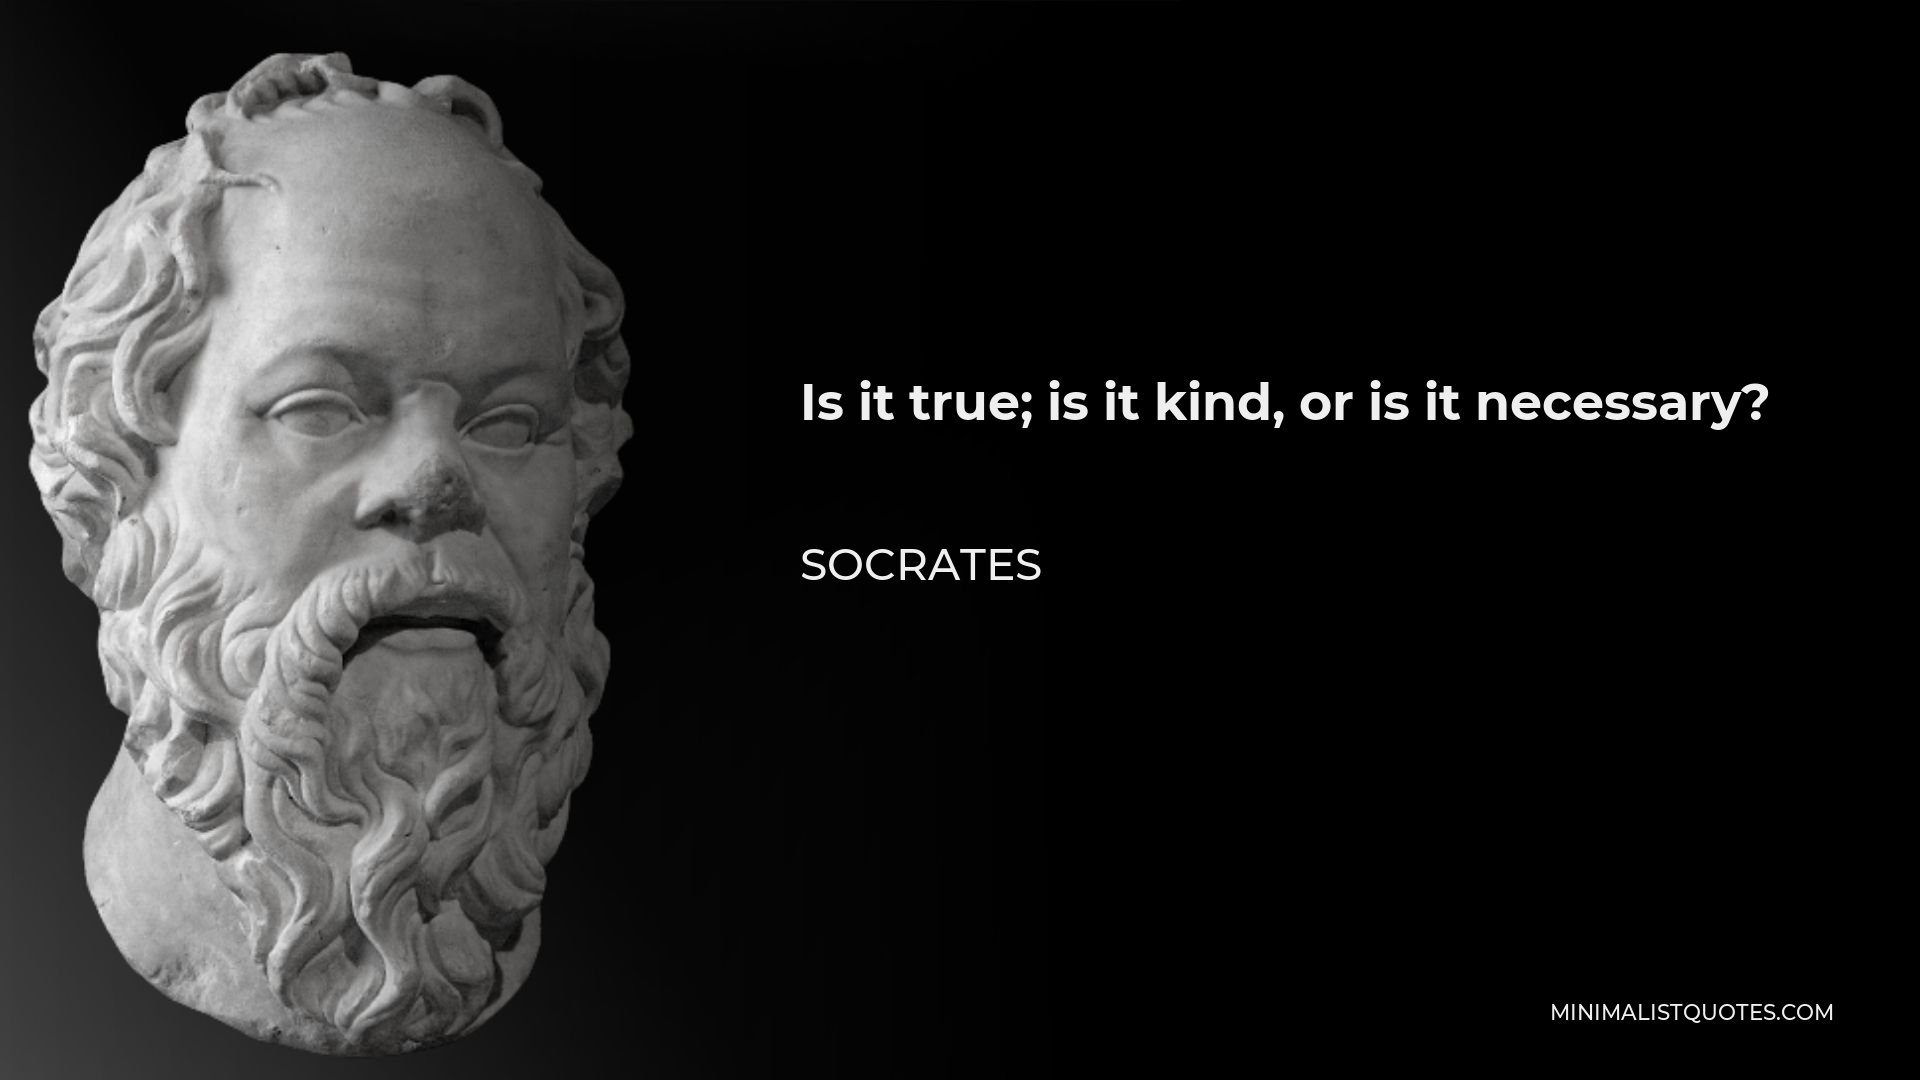 Socrates Quote - Is it true; is it kind, or is it necessary?